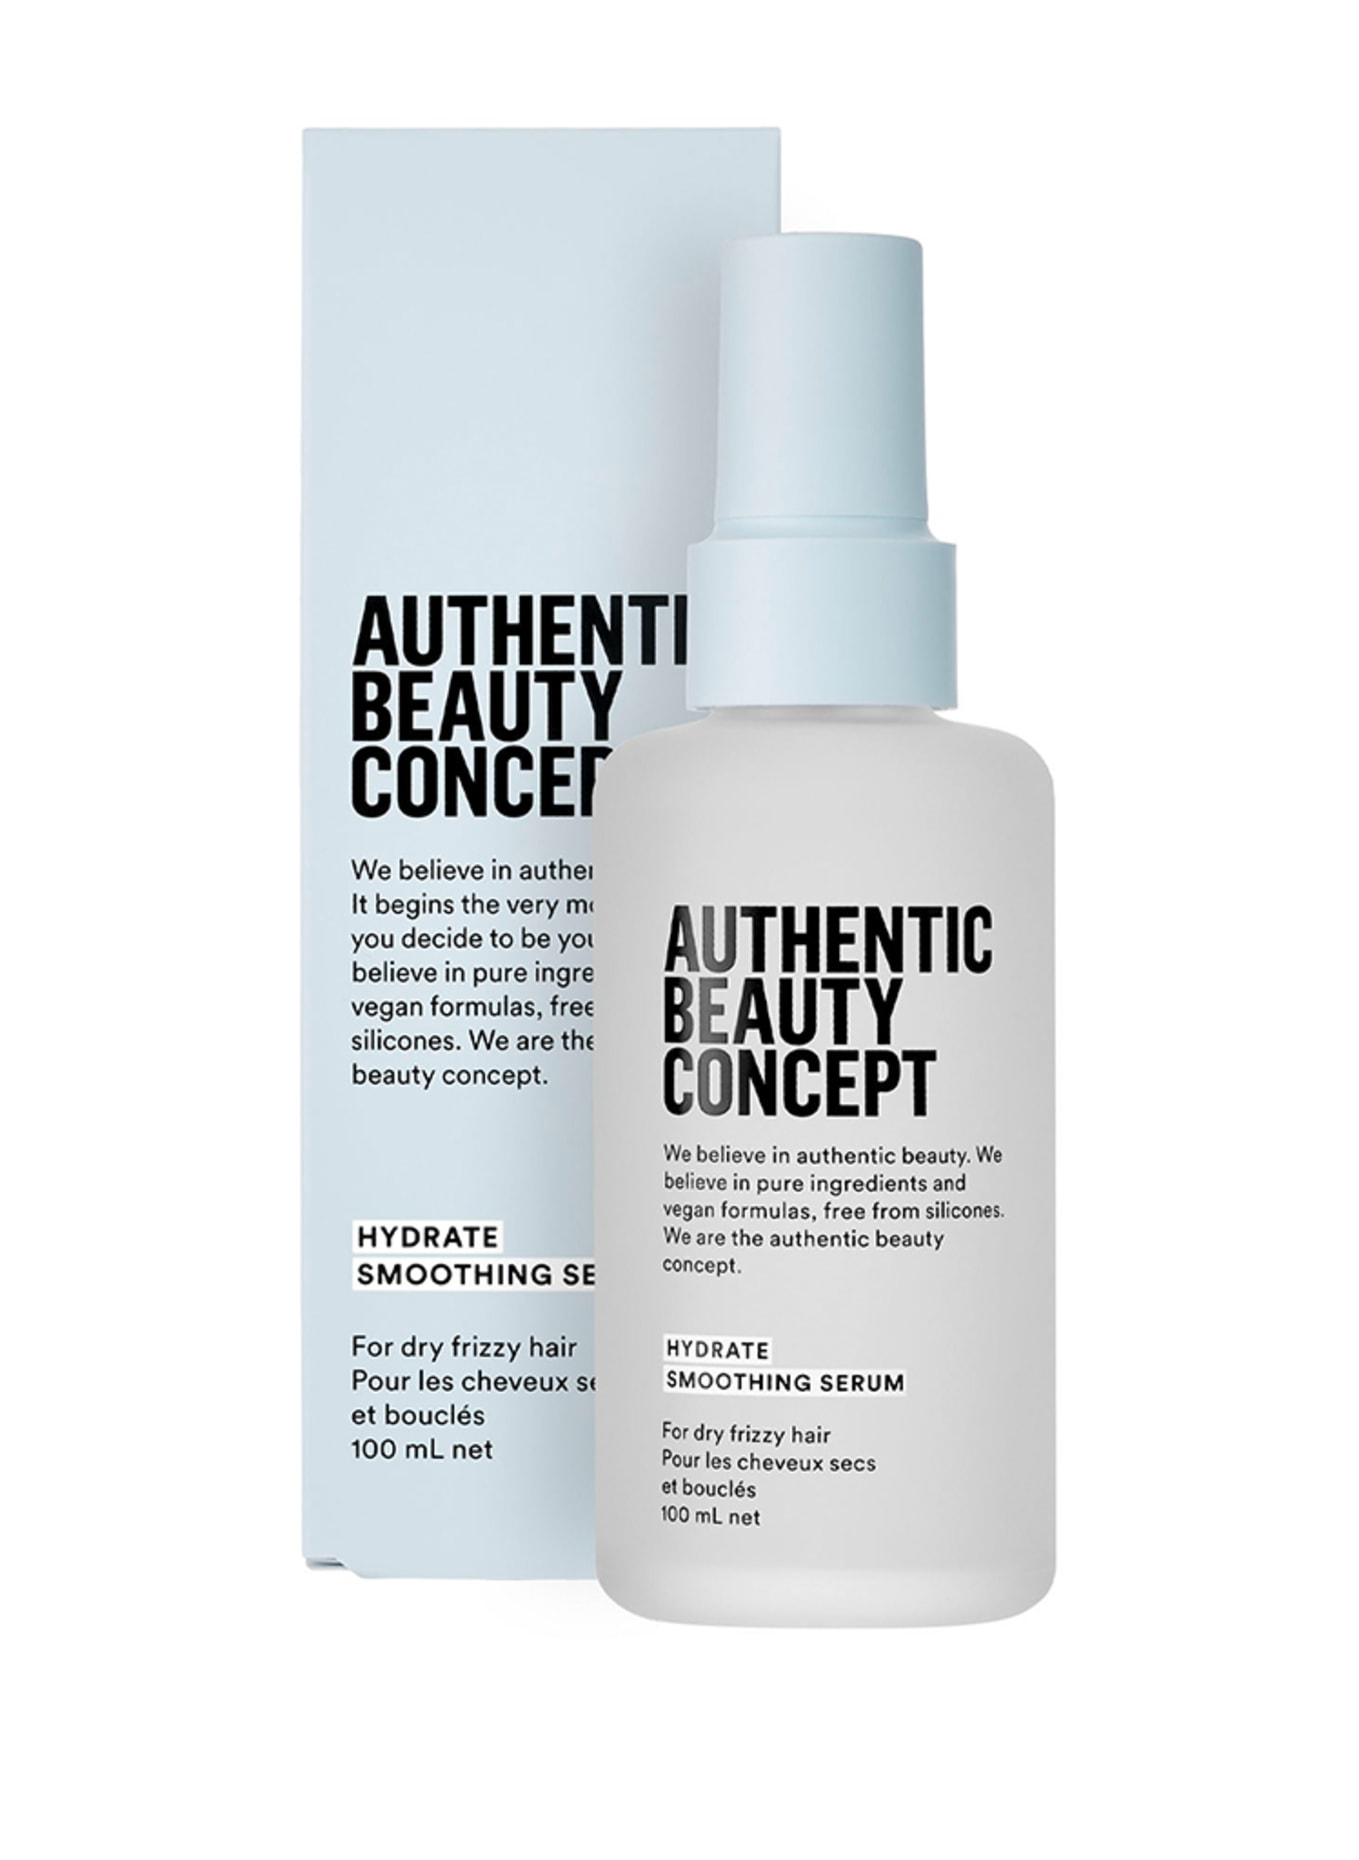 AUTHENTIC BEAUTY CONCEPT HYDRATE SMOOTHING SERUM (Bild 2)